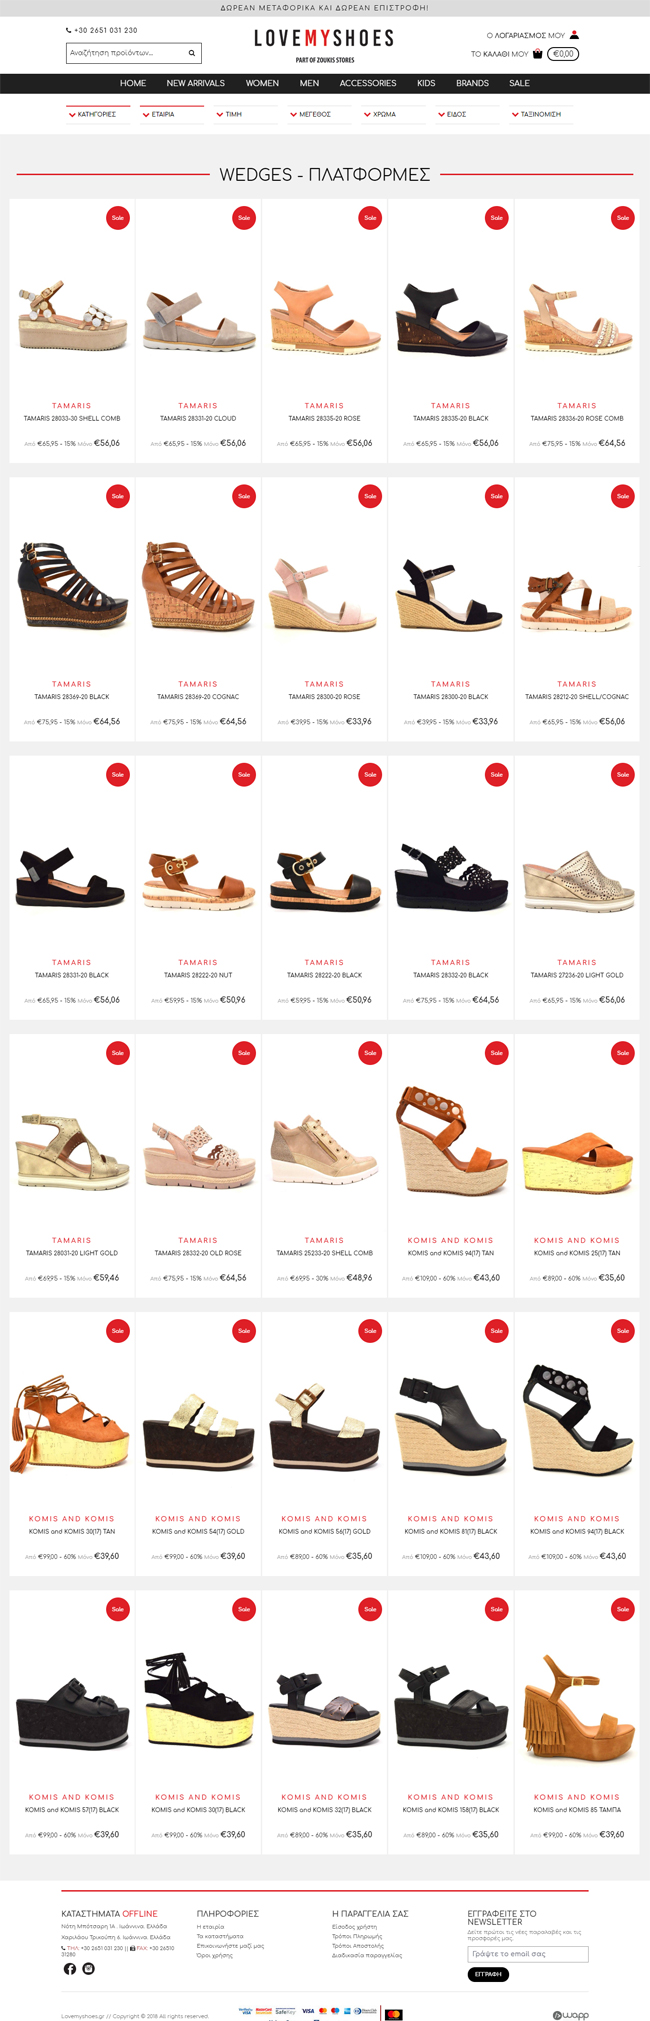 Responsive Eshop for Love My Shoes in Ioannina